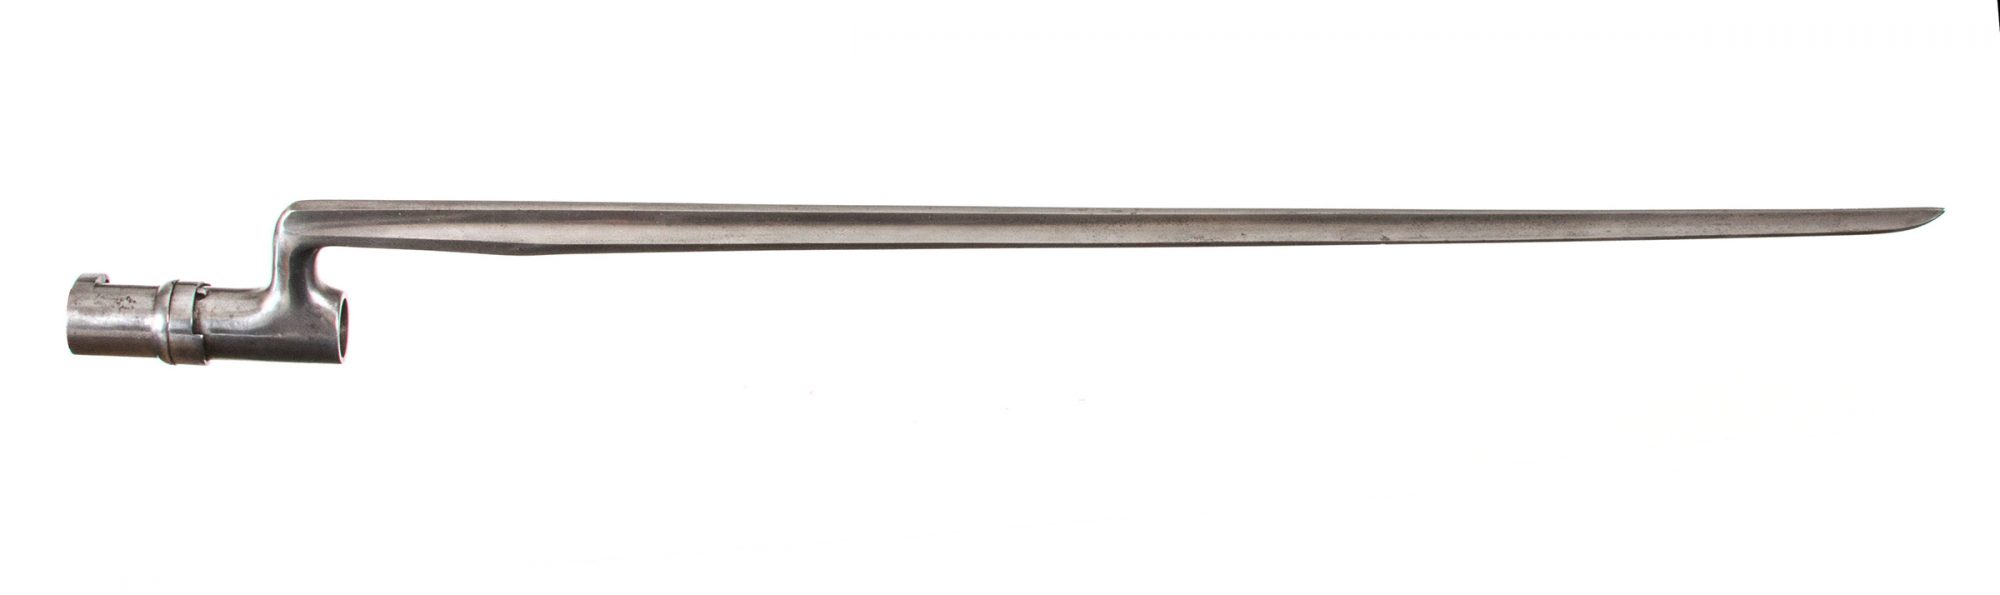 Winchester 1873 Musket with Bayonet Sold - Turnbull Restoration